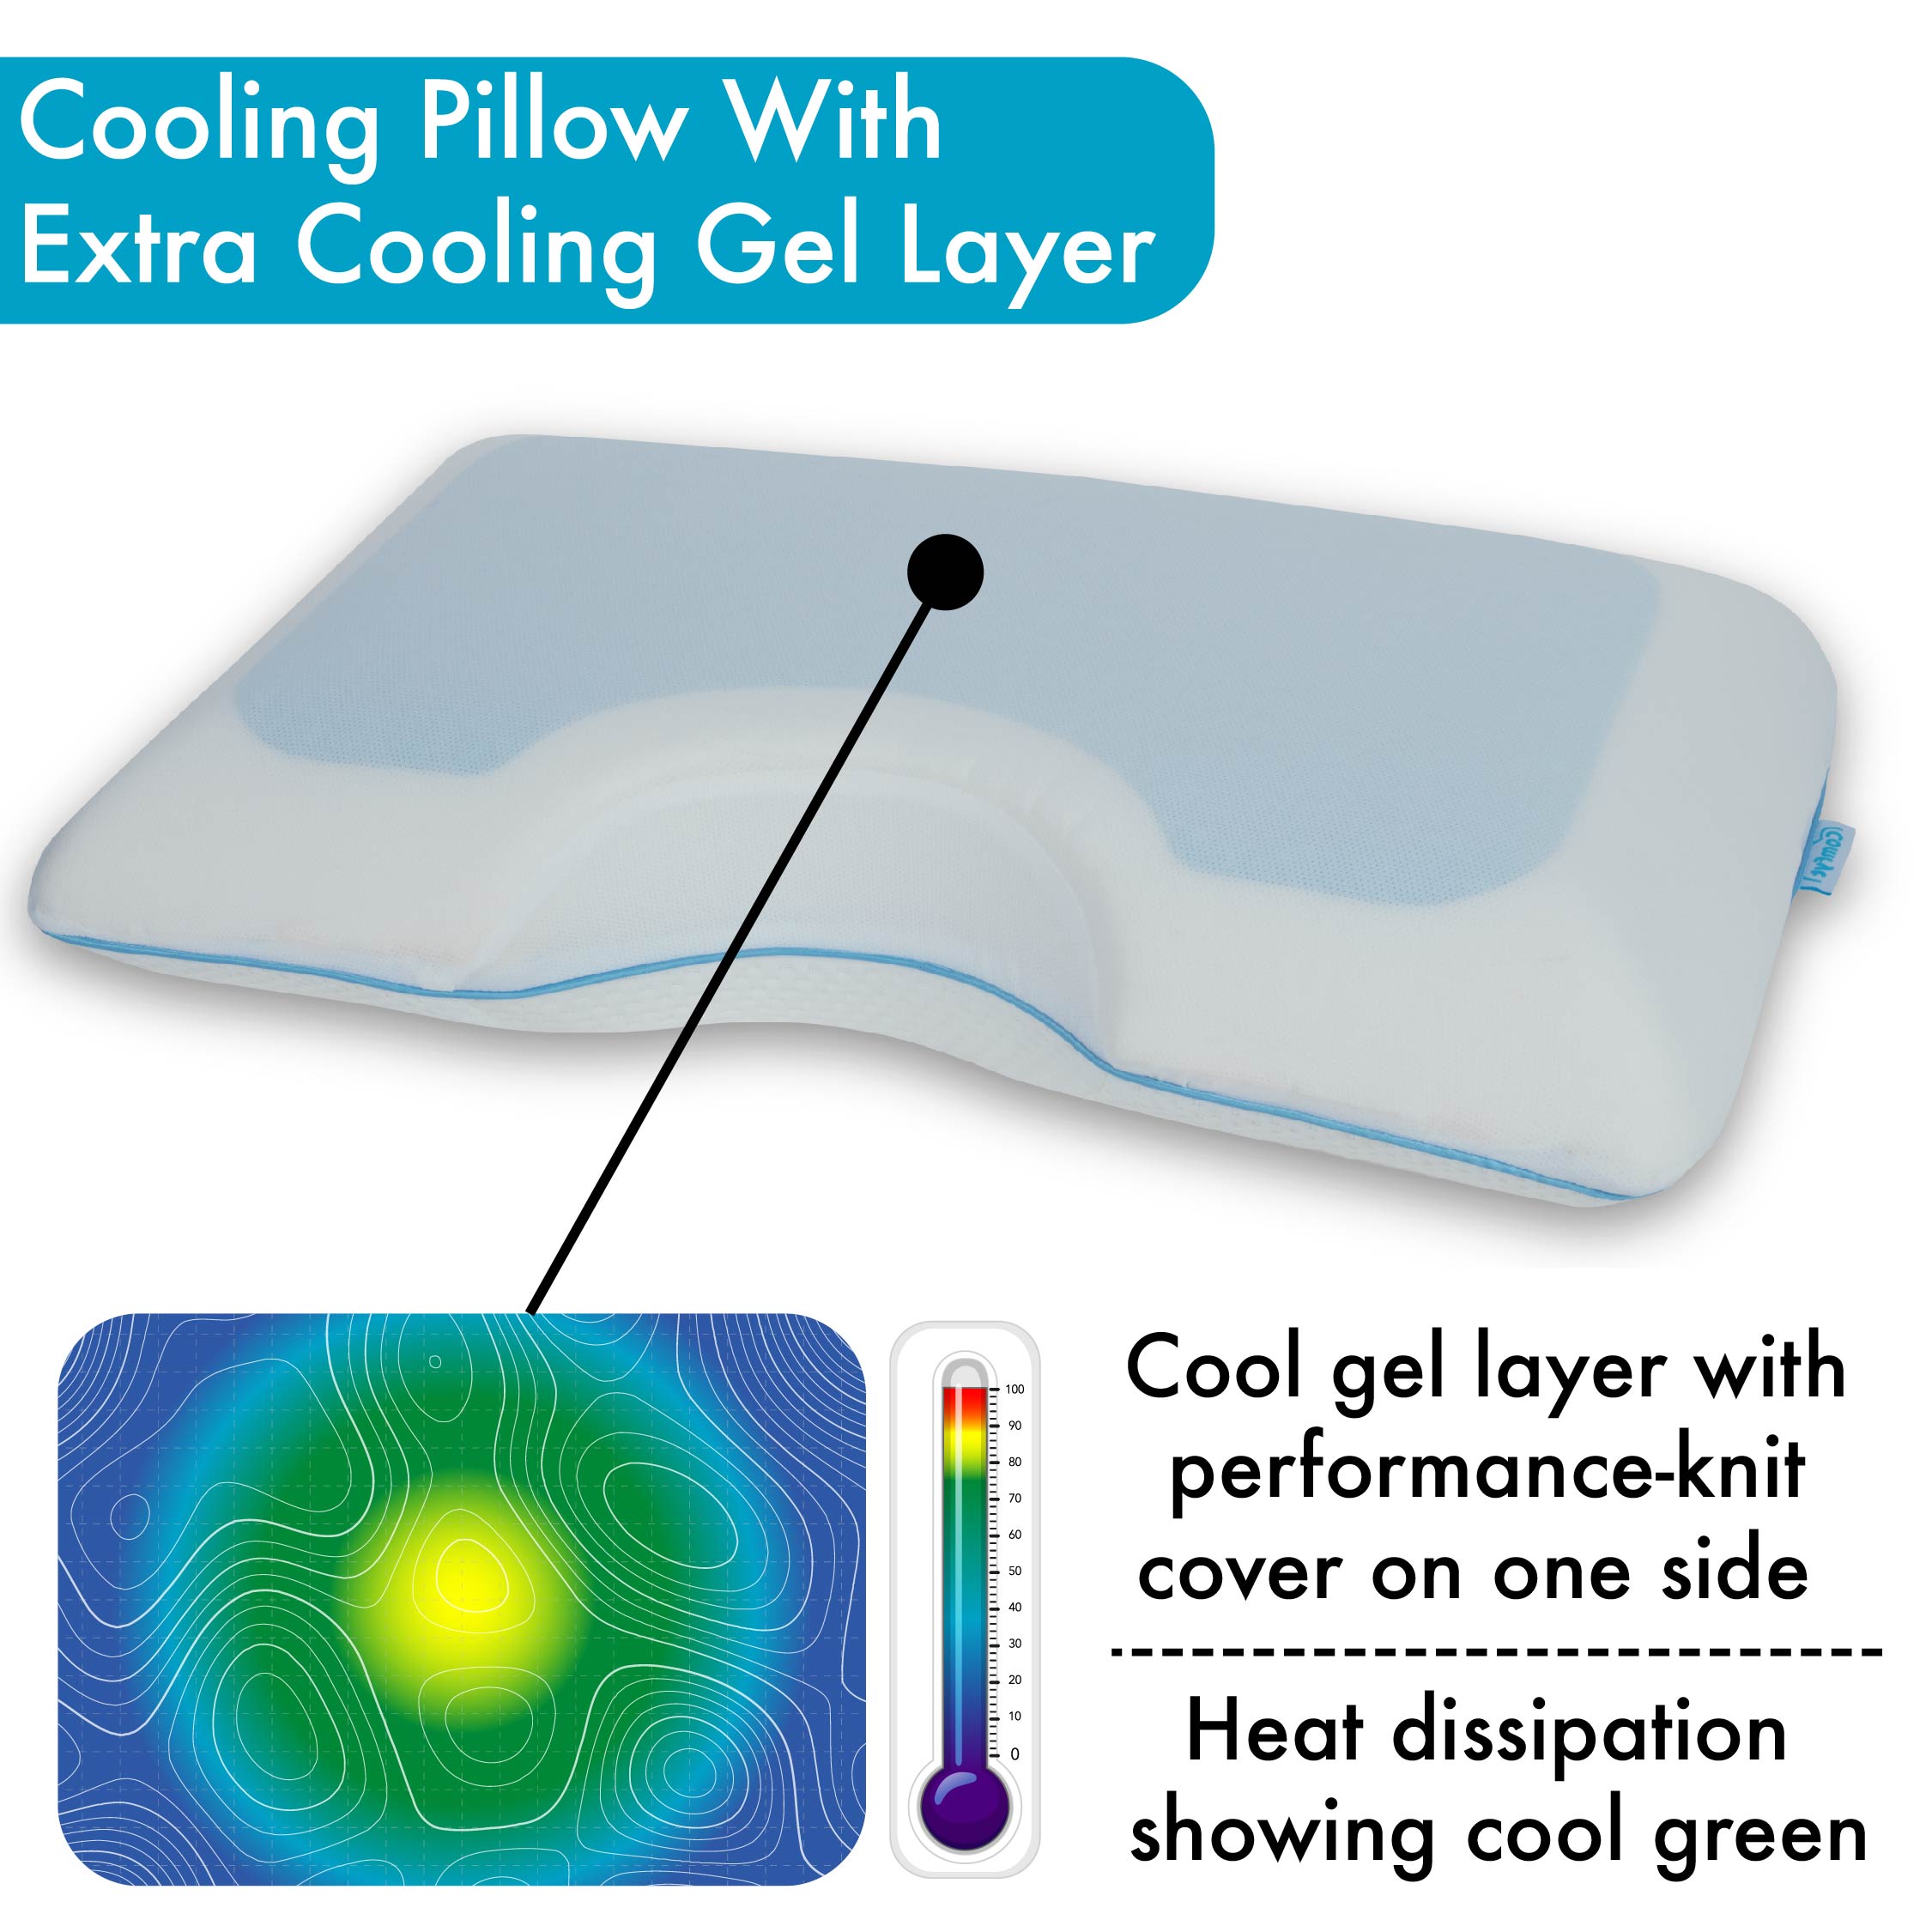 Best Pillow for Side Sleepers, Cooling Pillow